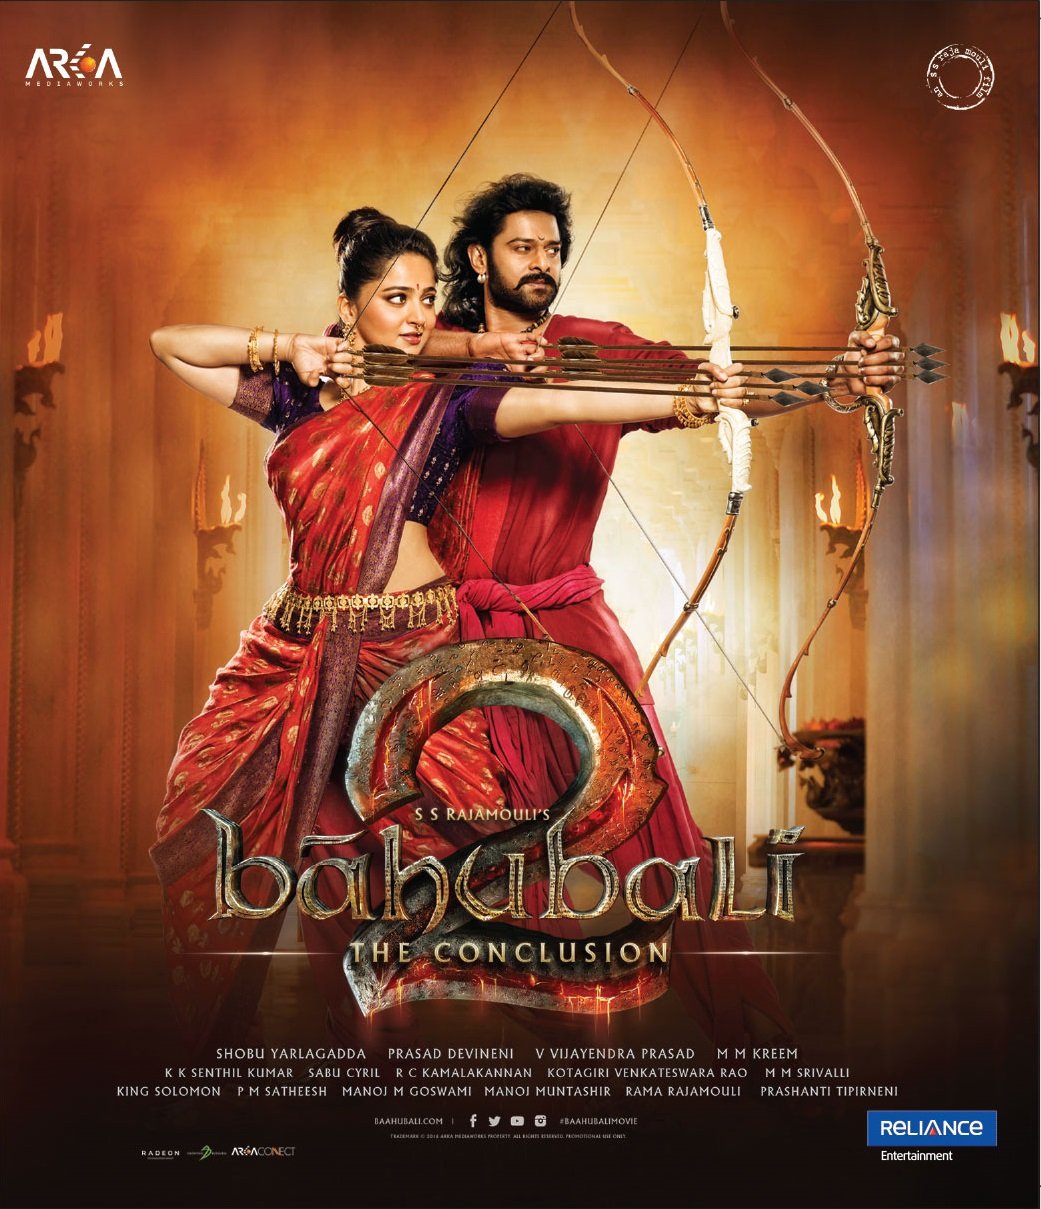 Who is the director of Bahubali?